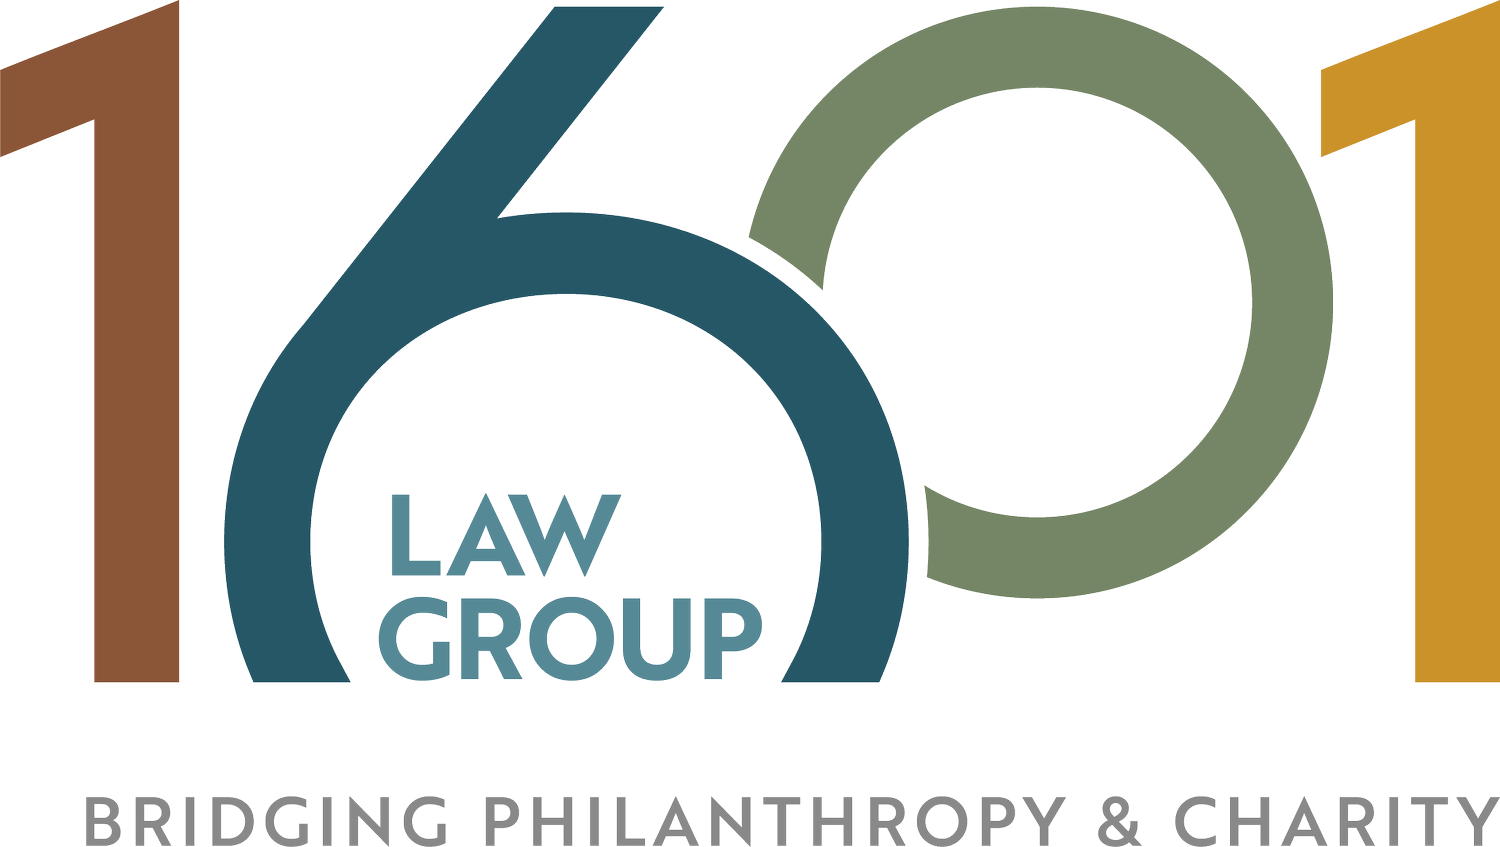 1601 Law Group